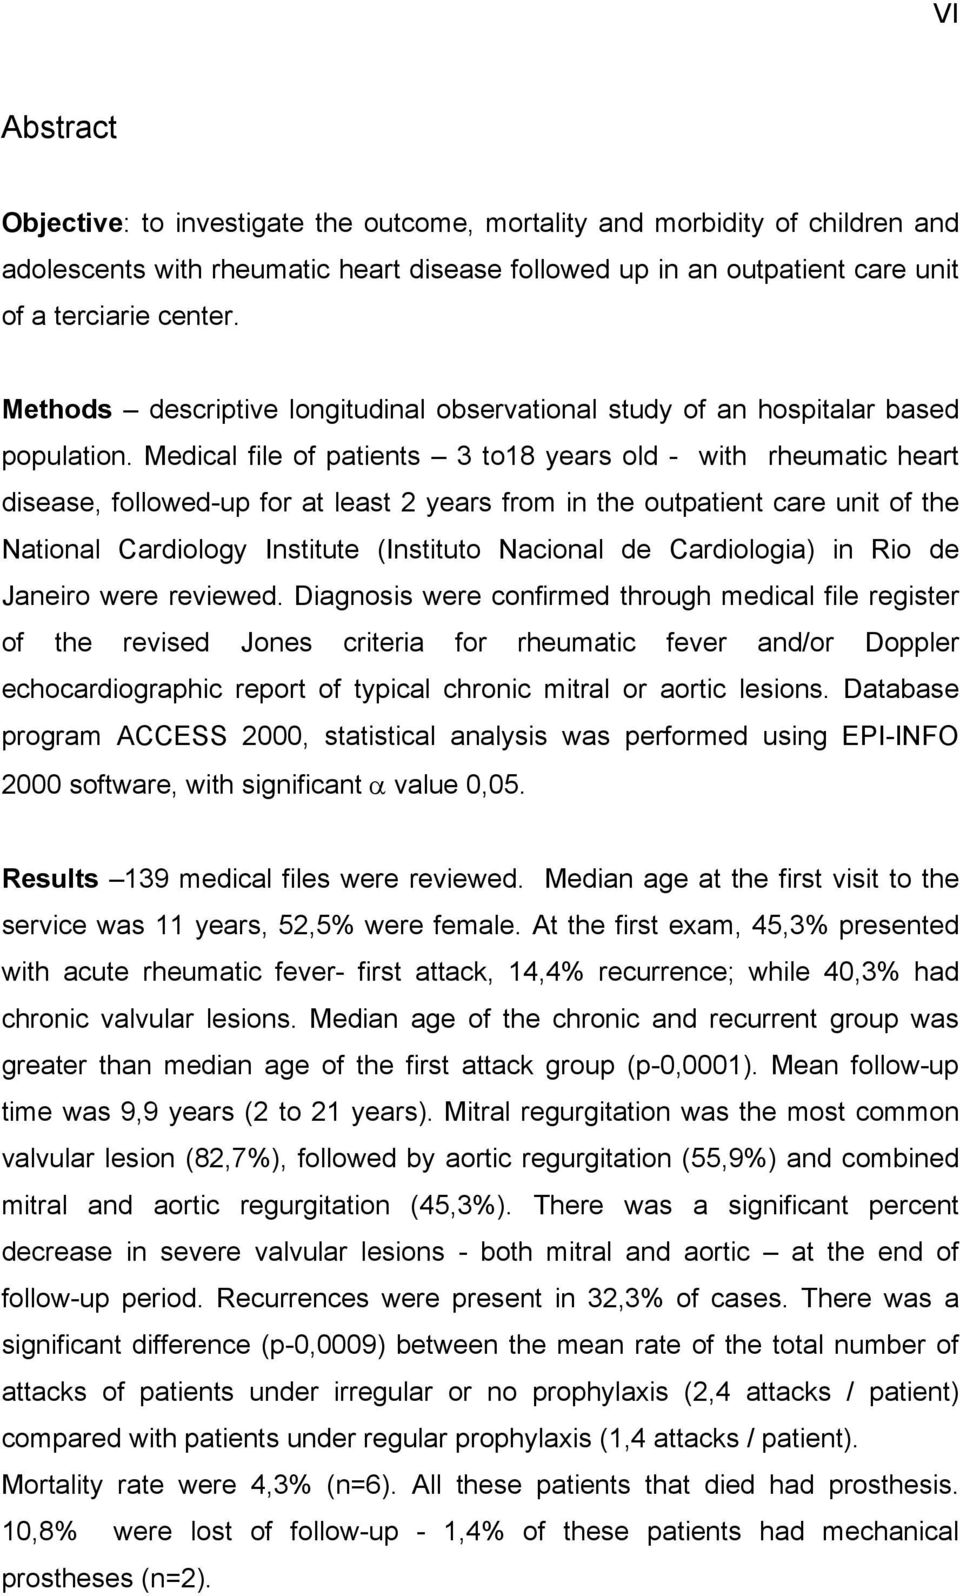 Medical file of patients 3 to18 years old - with rheumatic heart disease, followed-up for at least 2 years from in the outpatient care unit of the National Cardiology Institute (Instituto Nacional de